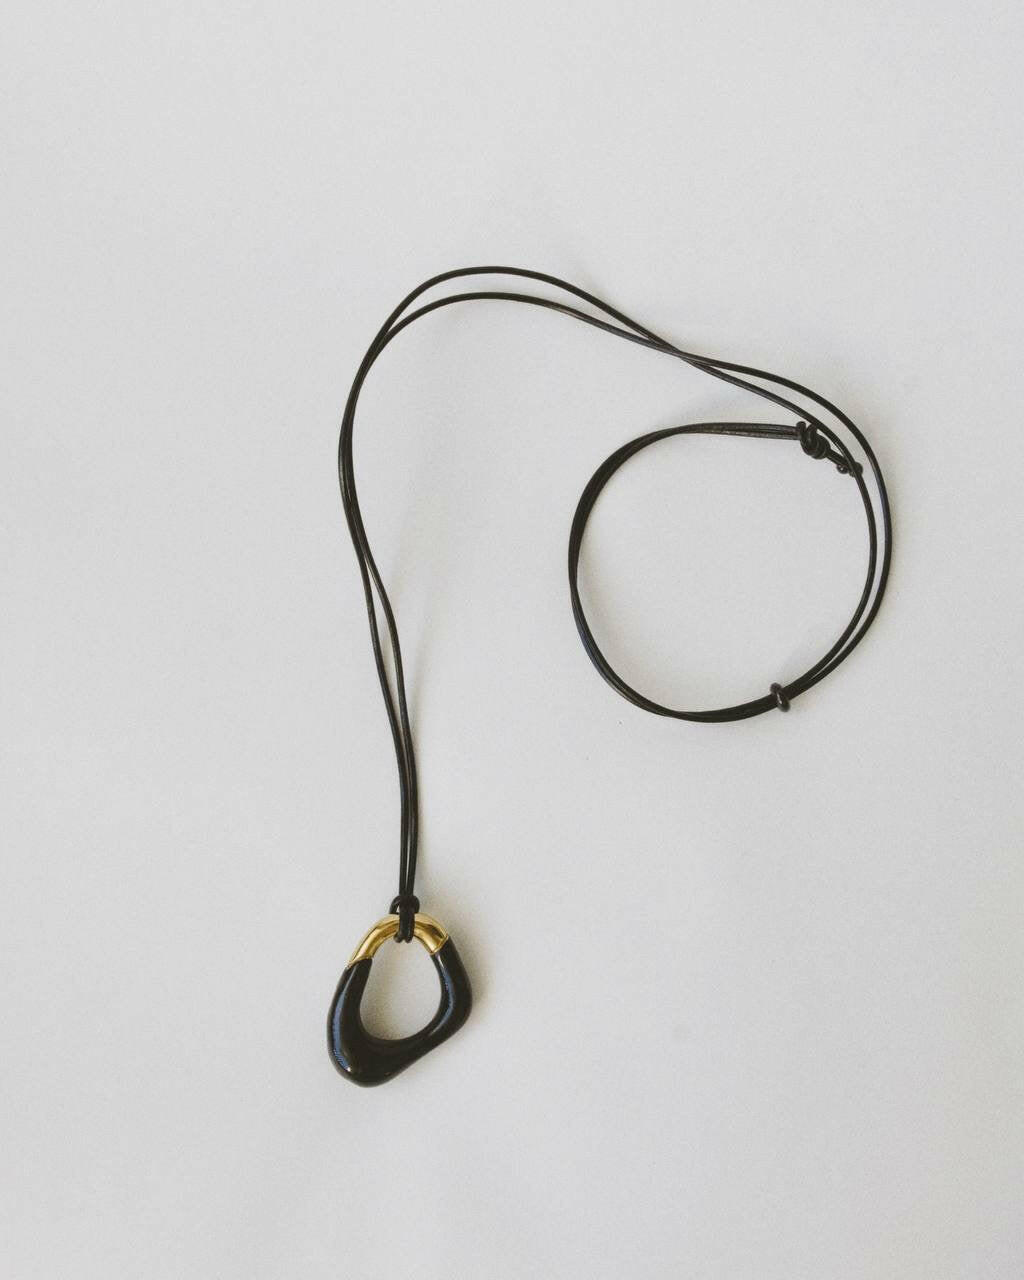 Close-up of the Momentum Necklace in black and gold, showing the pendant and vegan leather cord. The design features smooth, flowing lines inspired by surrealism, with enamel and gold plating.